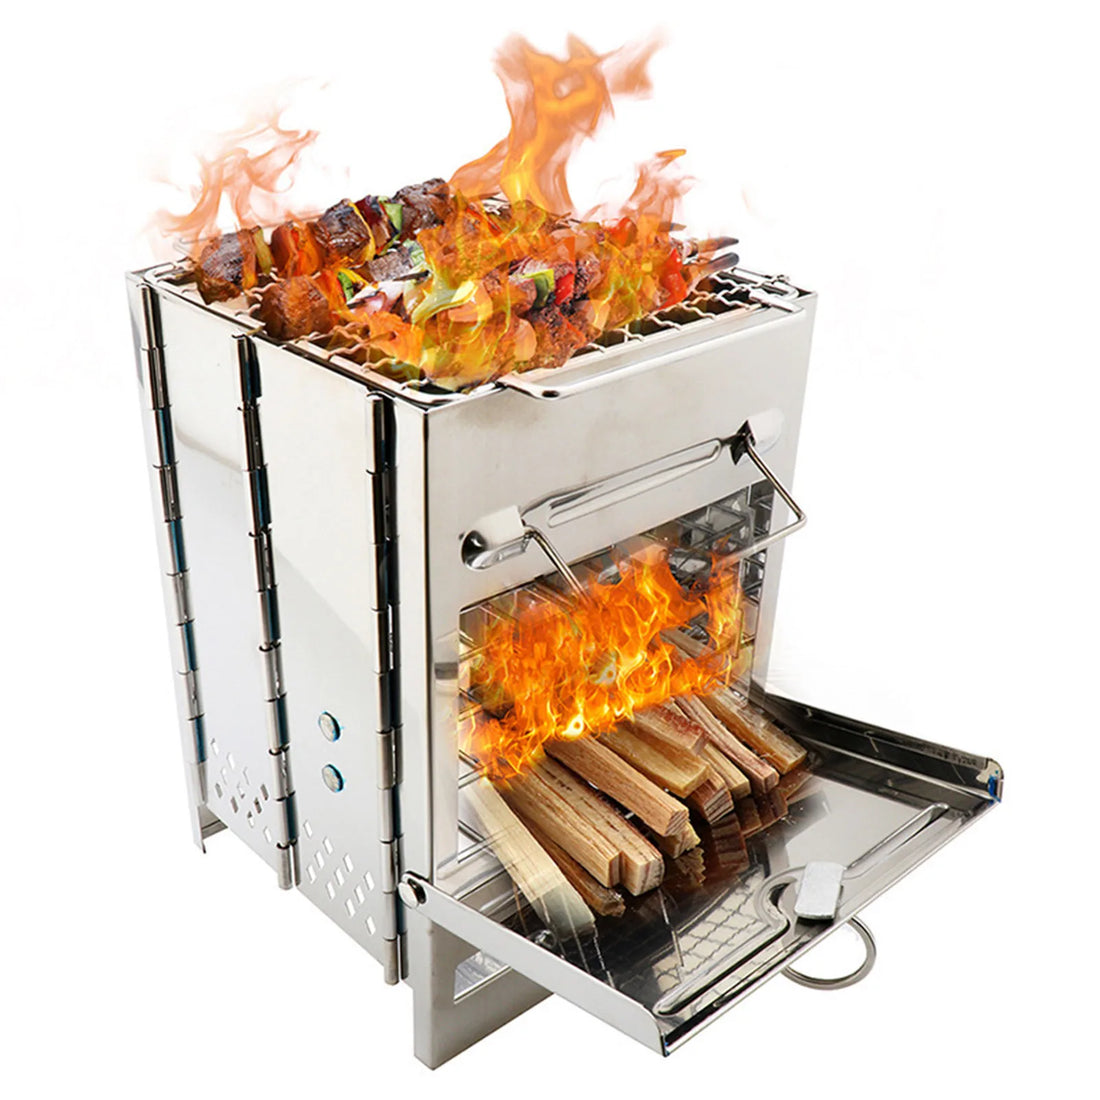 Tomshoo Portable Wood Stove/Grill - Fozz&